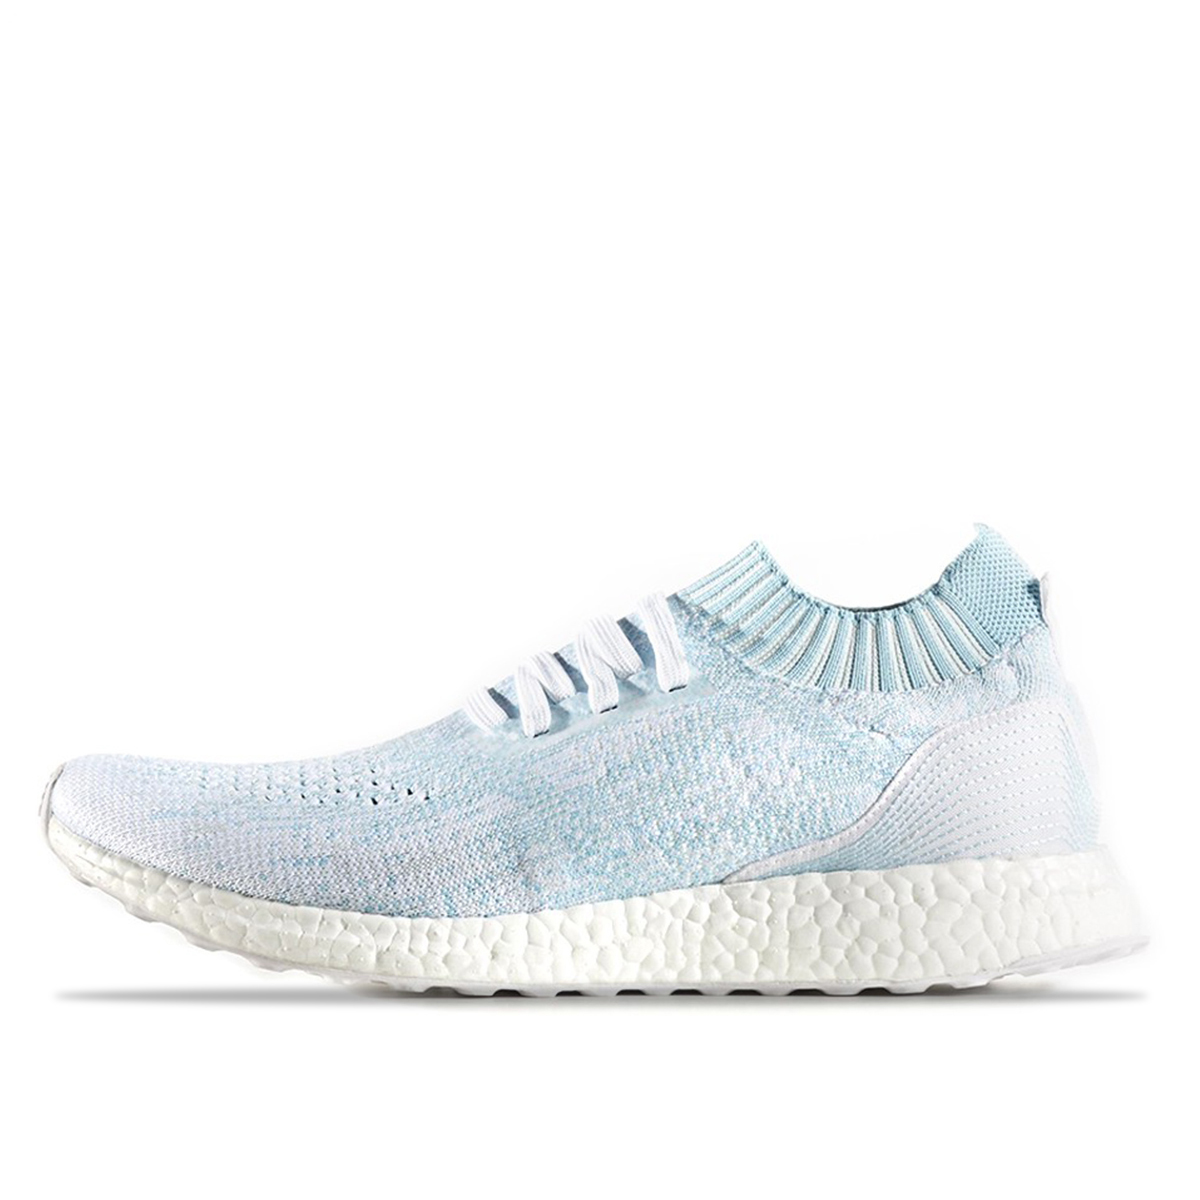 Excluir promesa Chicle Adidas Ultra Boost Uncaged Parley Coral Bleaching Icey Blue | CP9686 - KLEKT